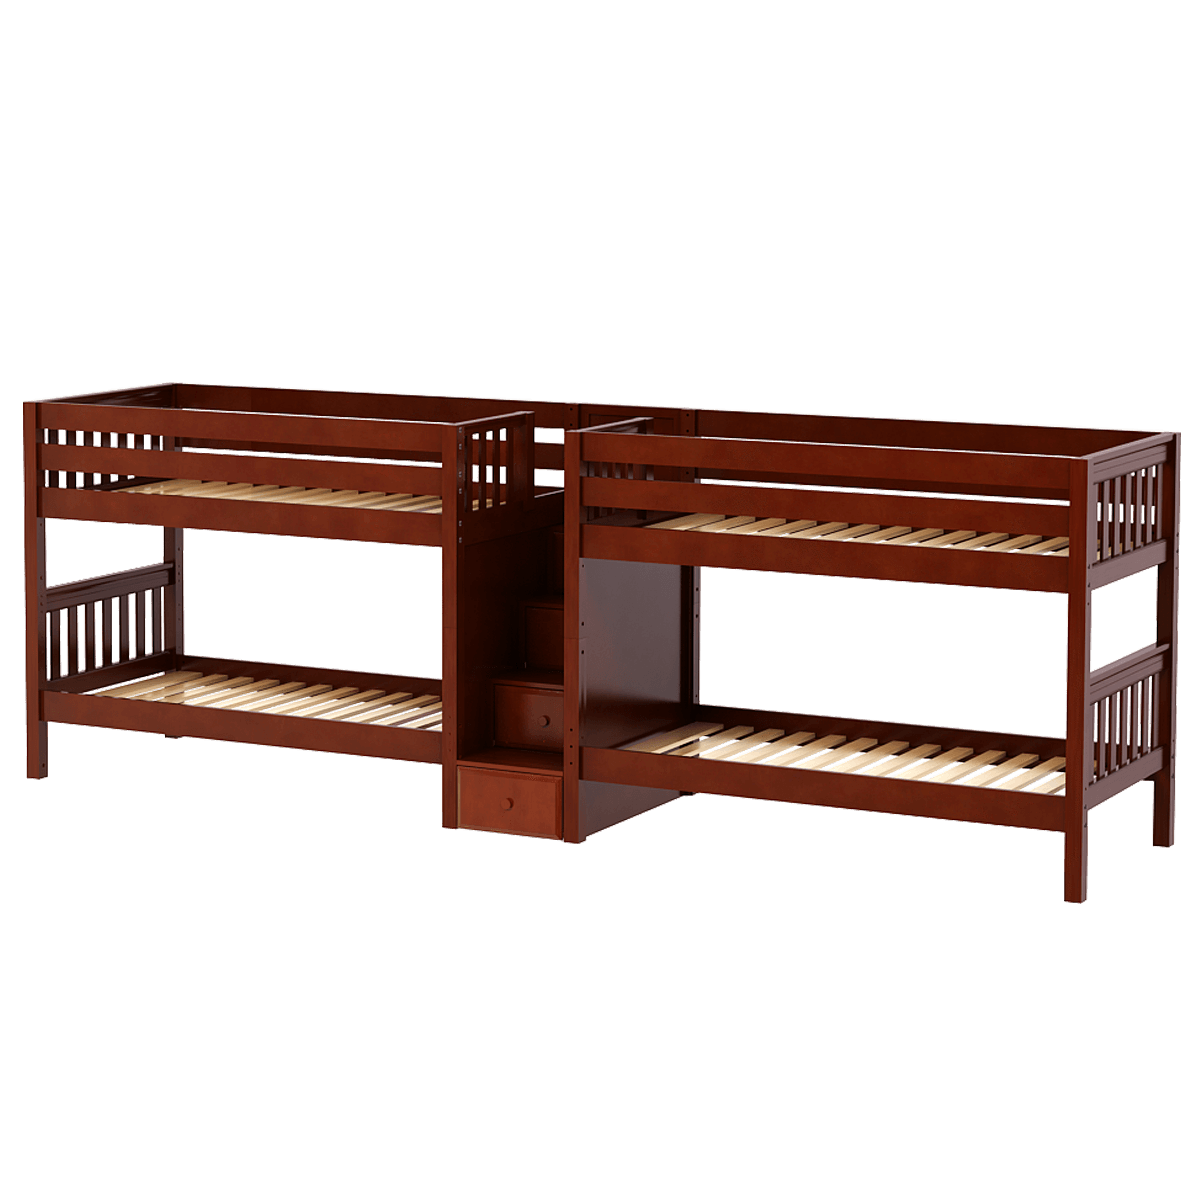 Maxtrix Twin XL Quadruple Bunk Bed with Stairs